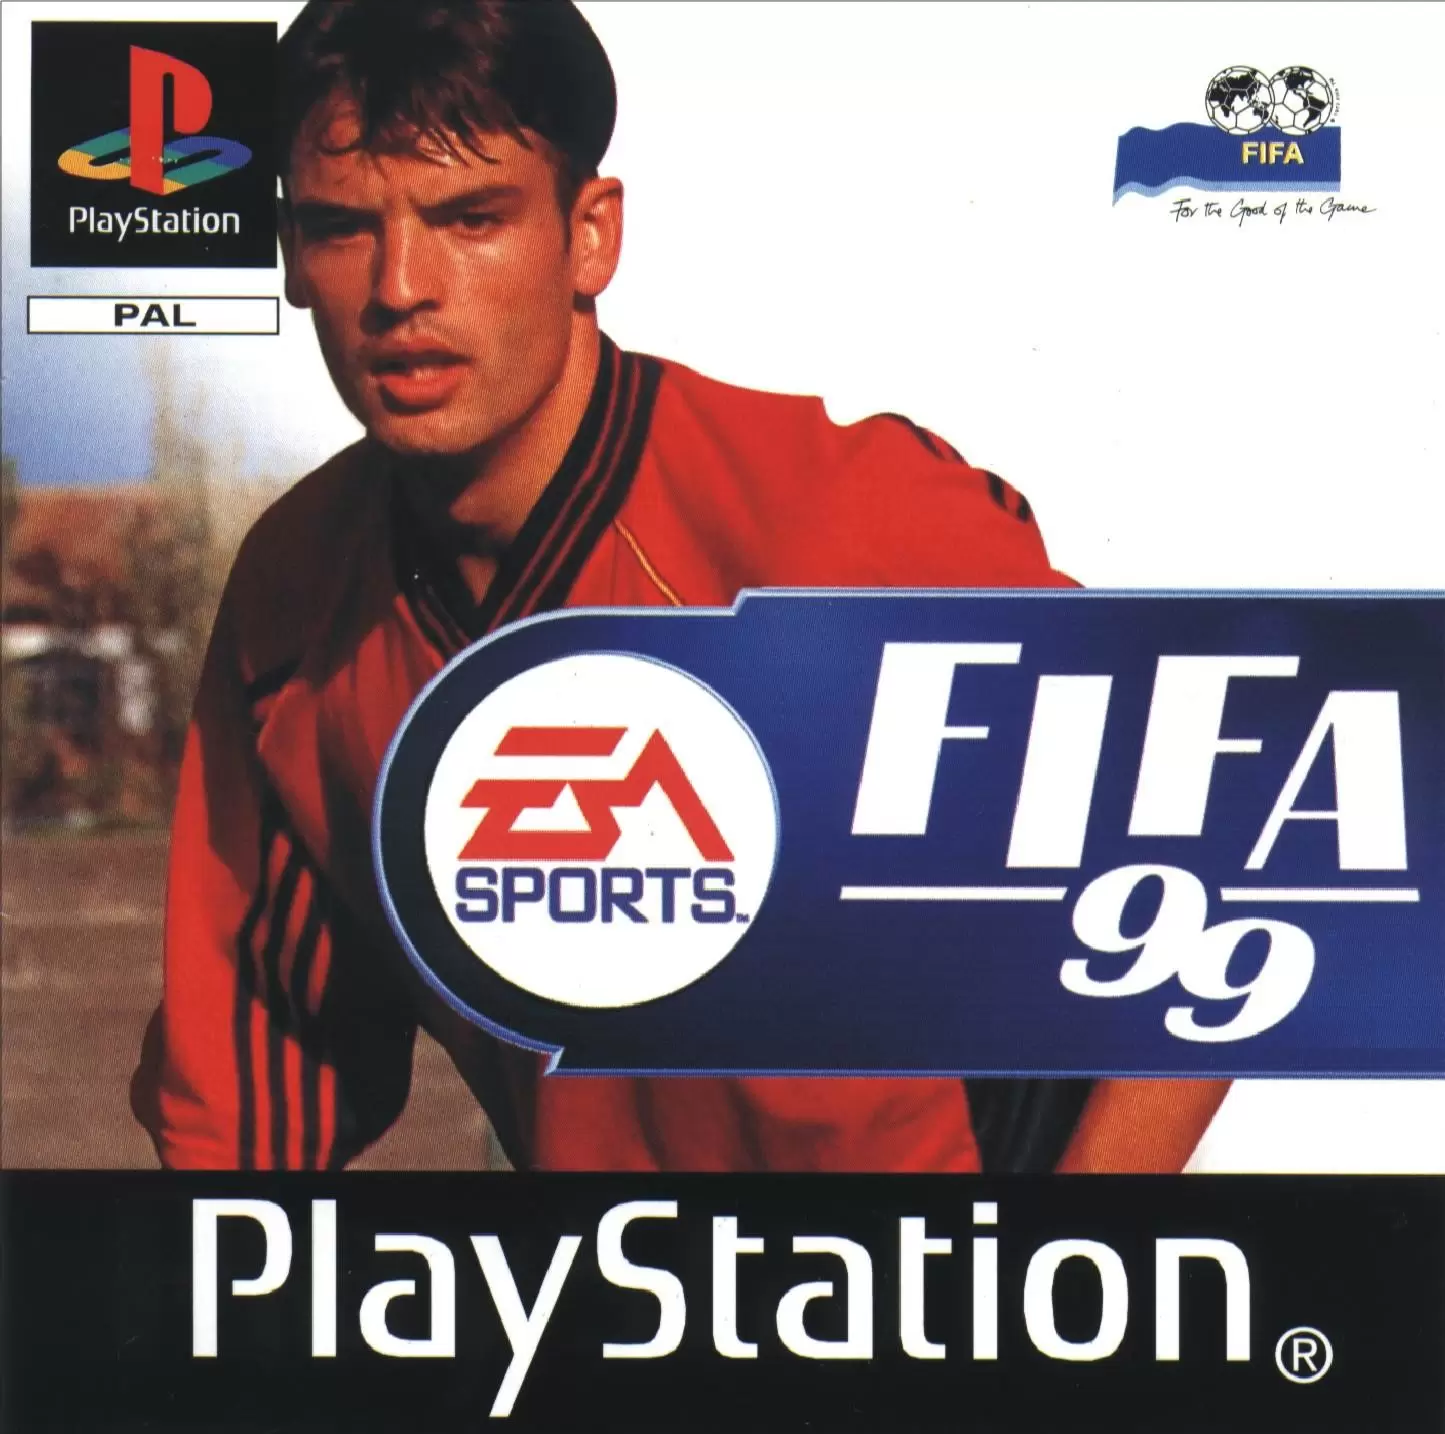 Jeux Playstation PS1 - FIFA 99